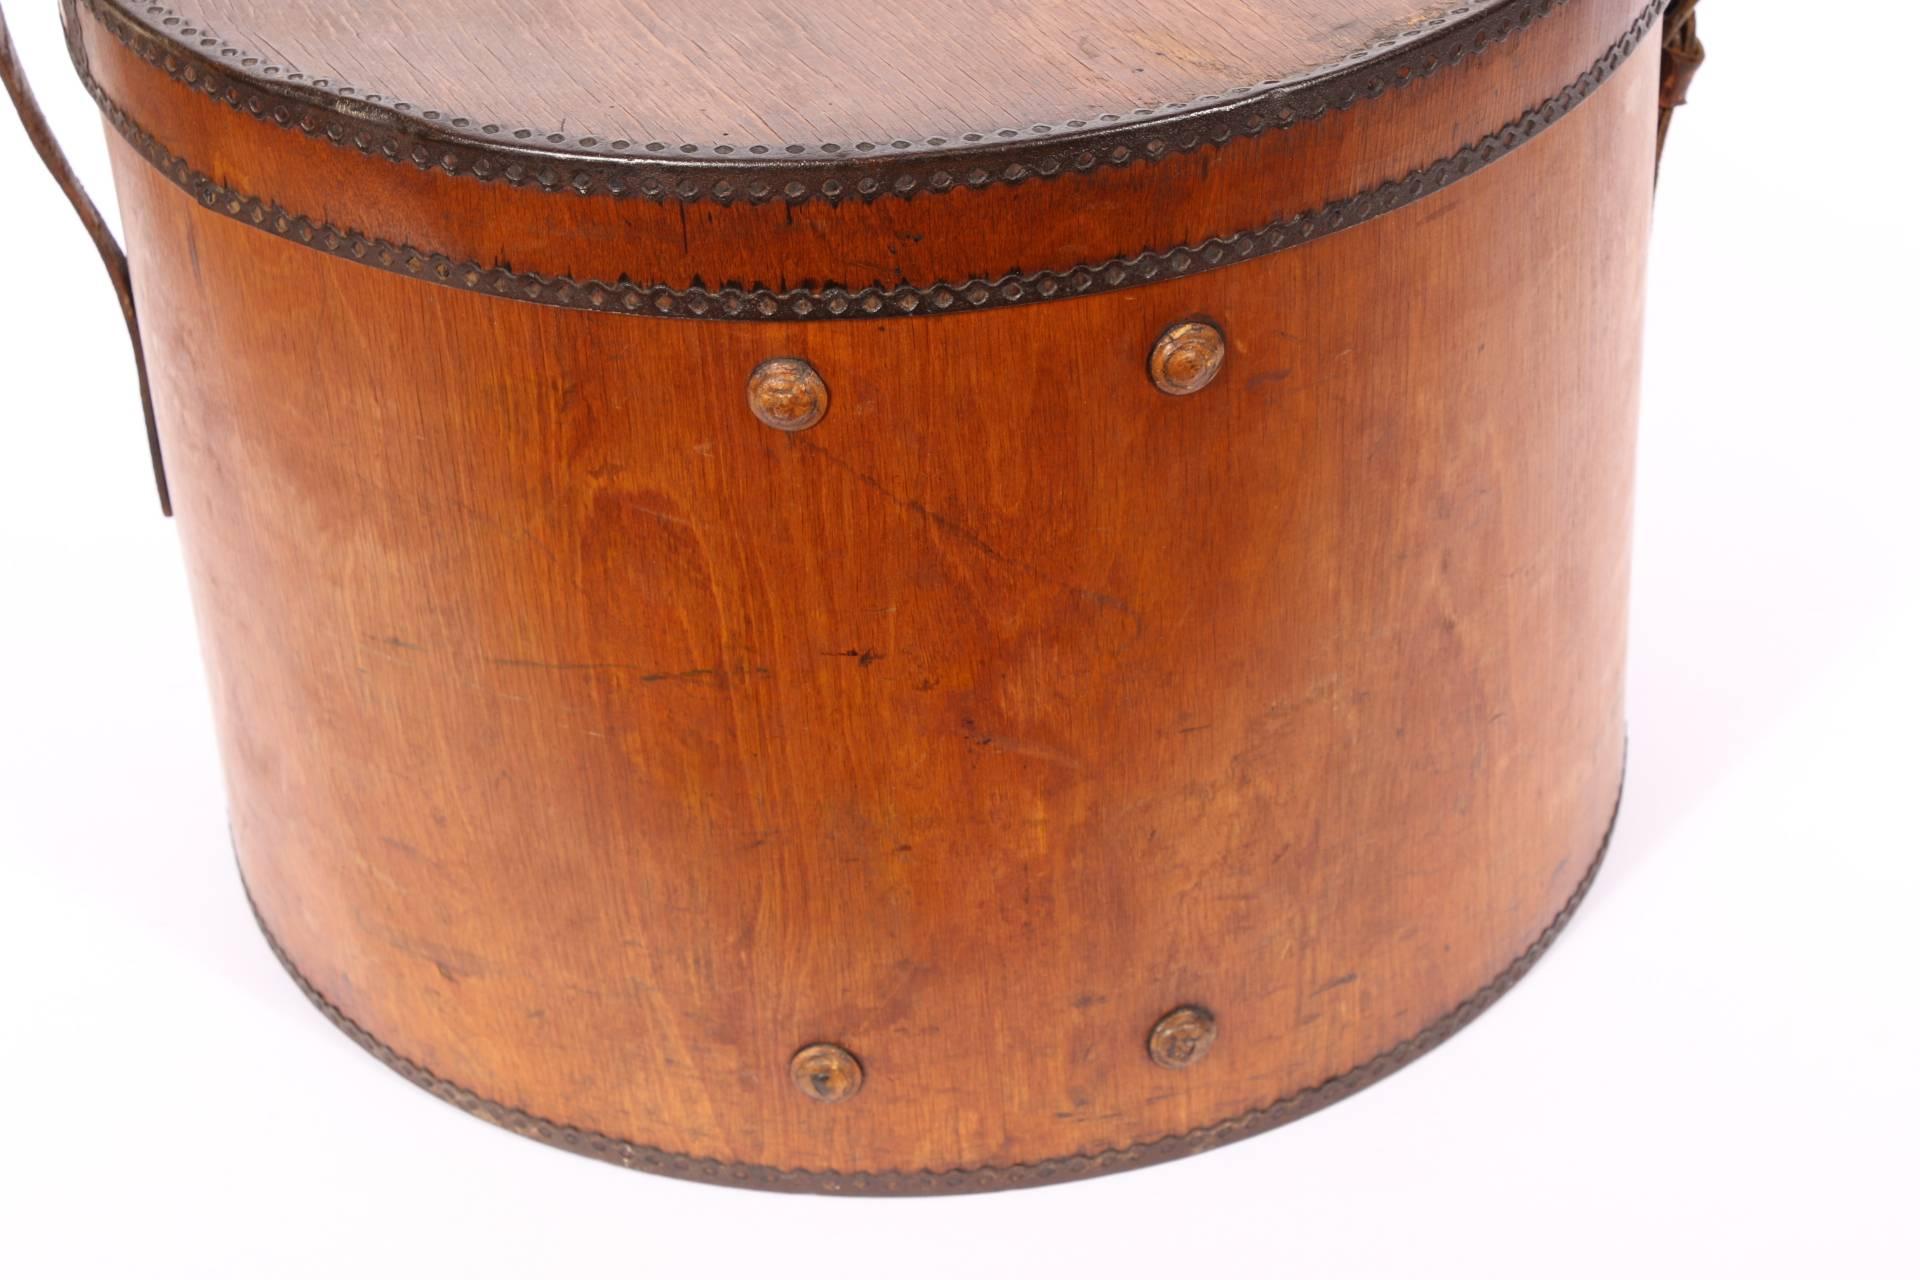 19th century wooden hat box having a circular form with leather strap and handle, crimped metal frame, wood button decorated.
Condition: some alligatoring to wood, wear to leather, consistent with age and use.